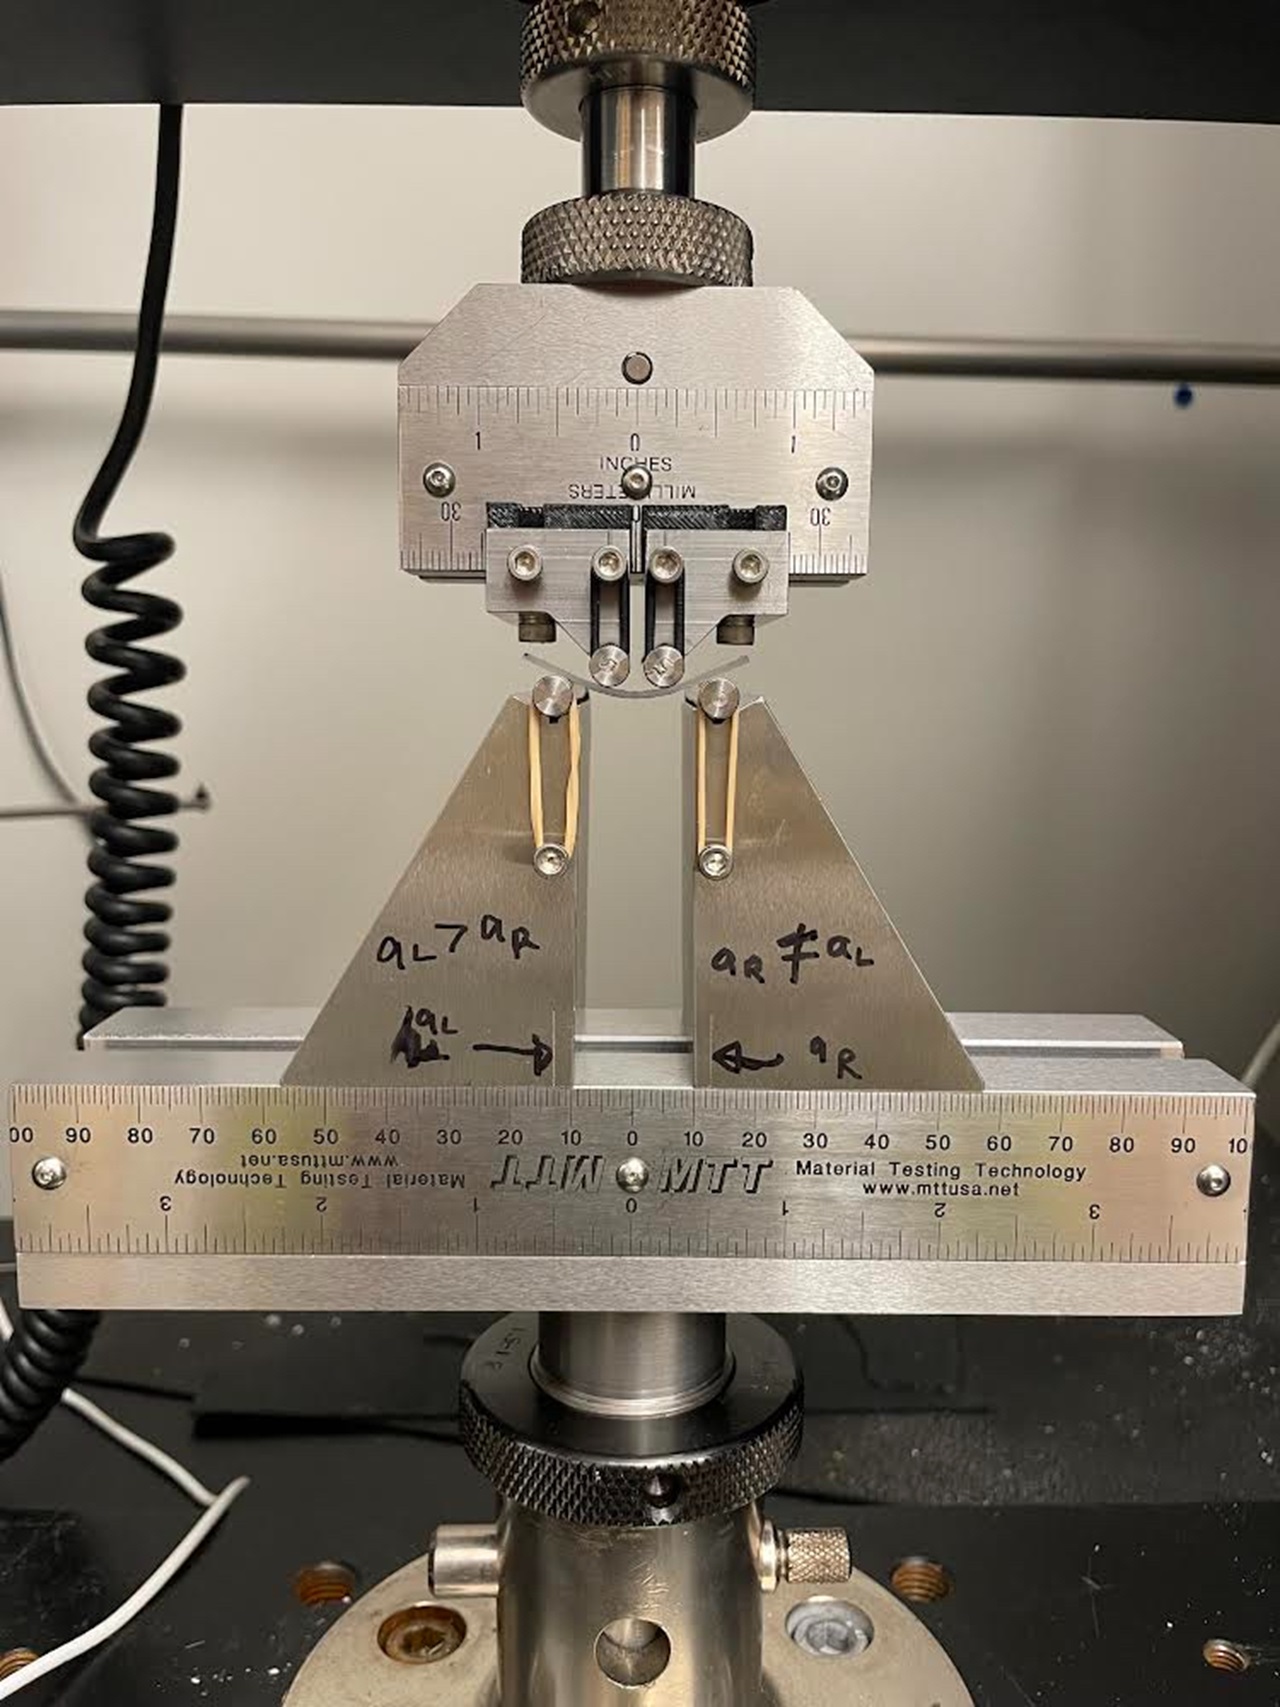 Photo of apparatus to test strength of aligner materials